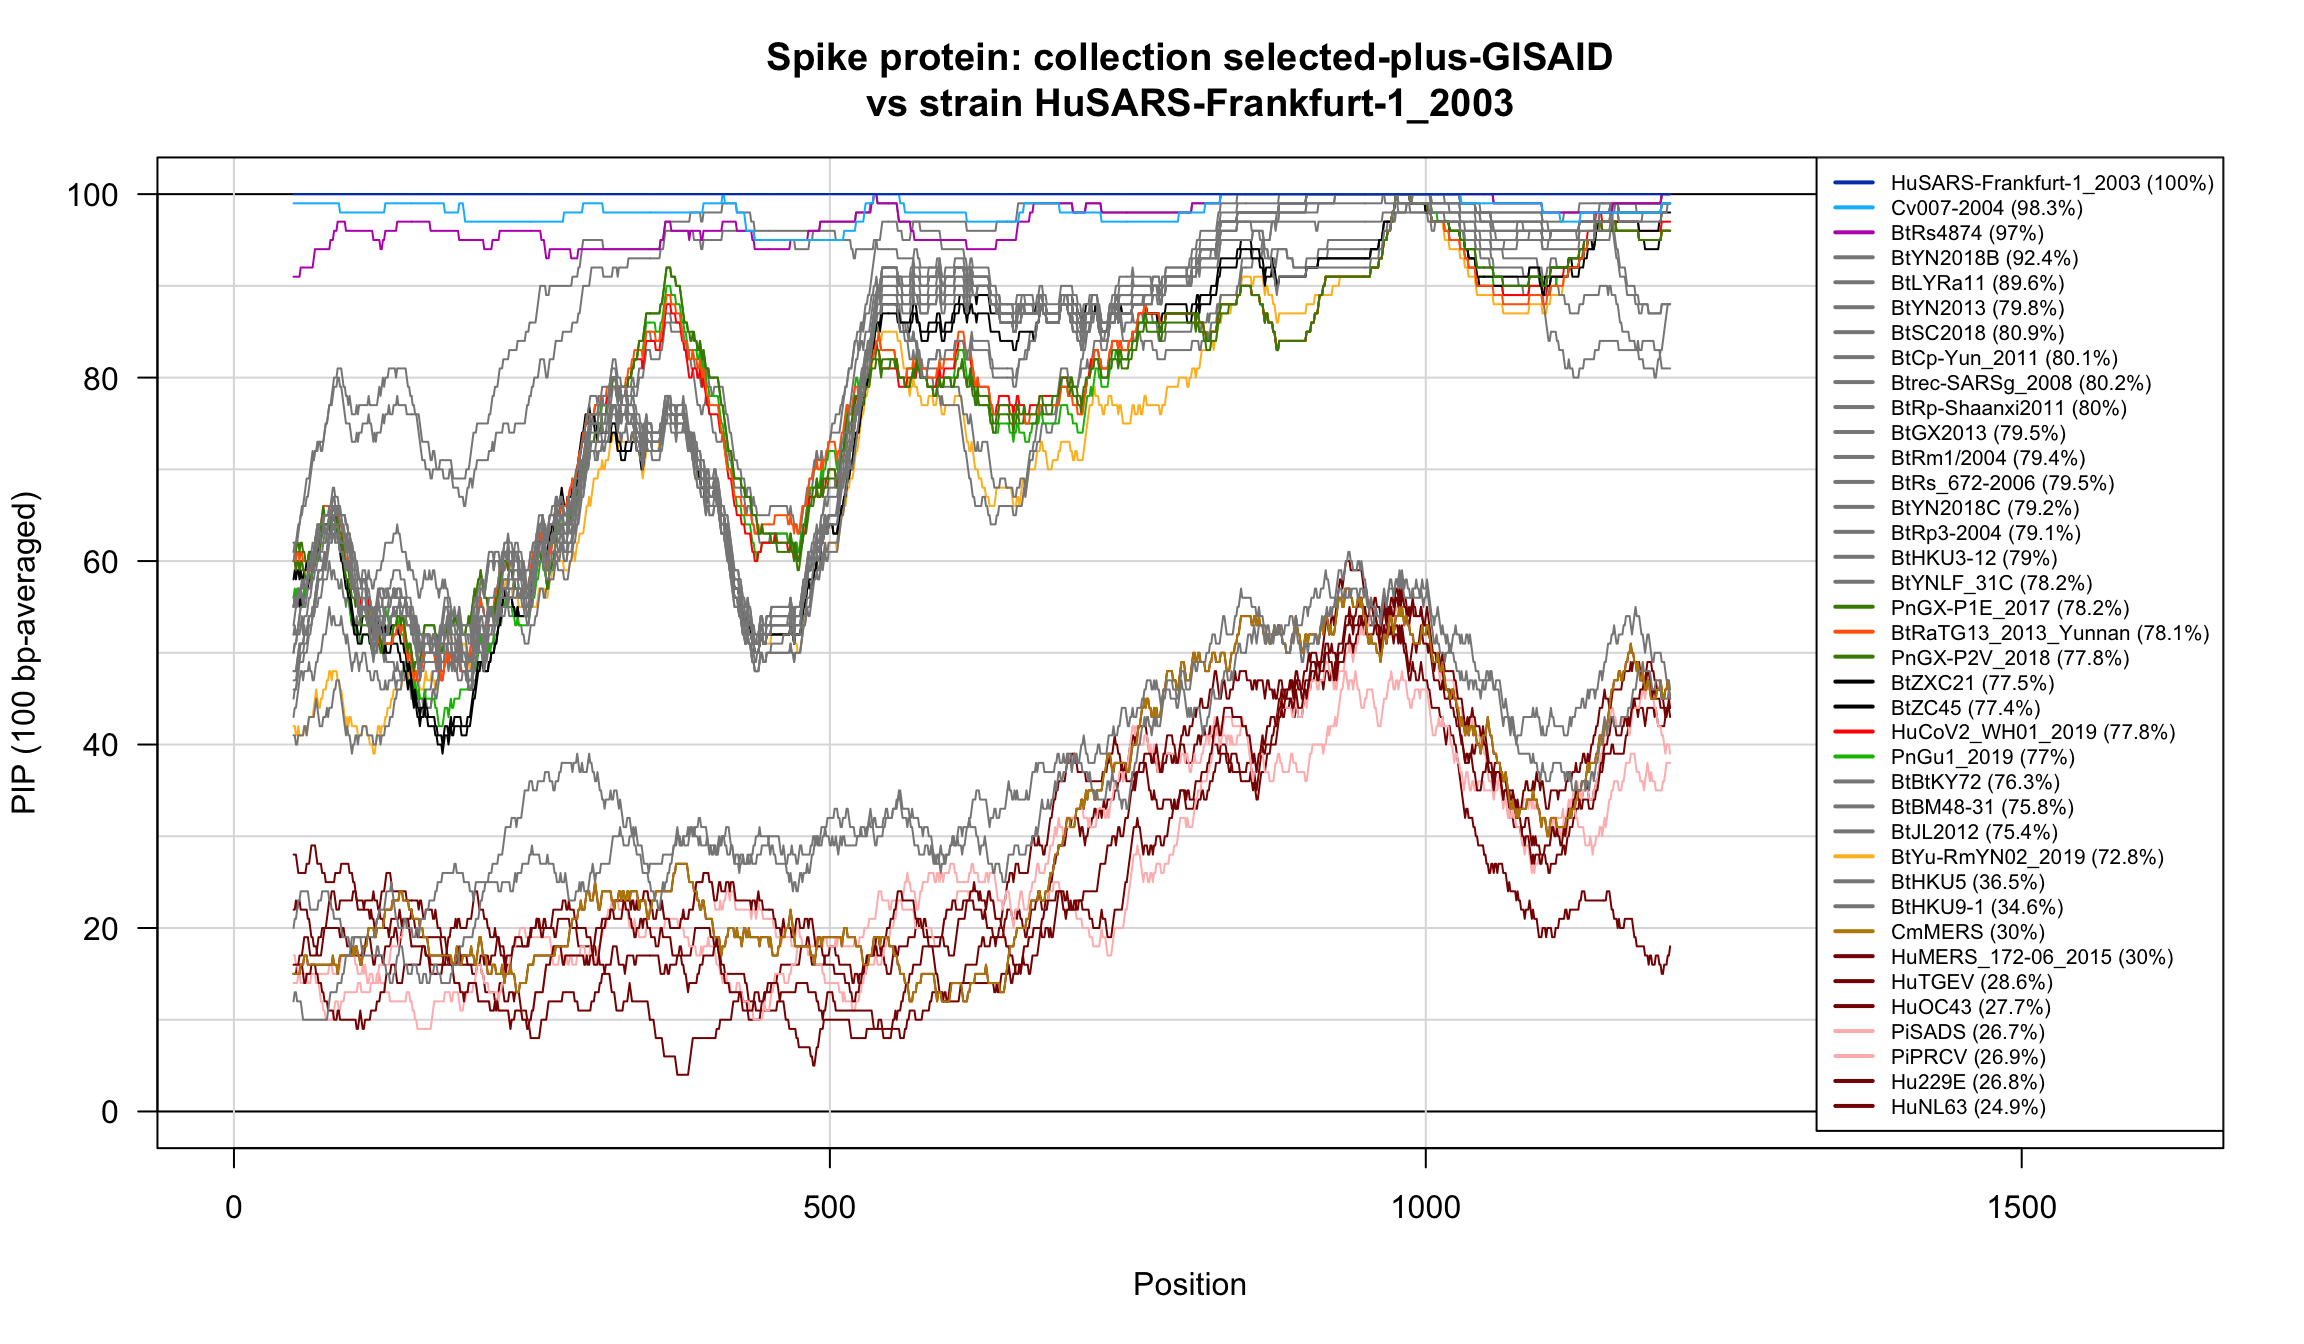 Percent Identical Positions (PIP) profiles of spike protein sequences. 